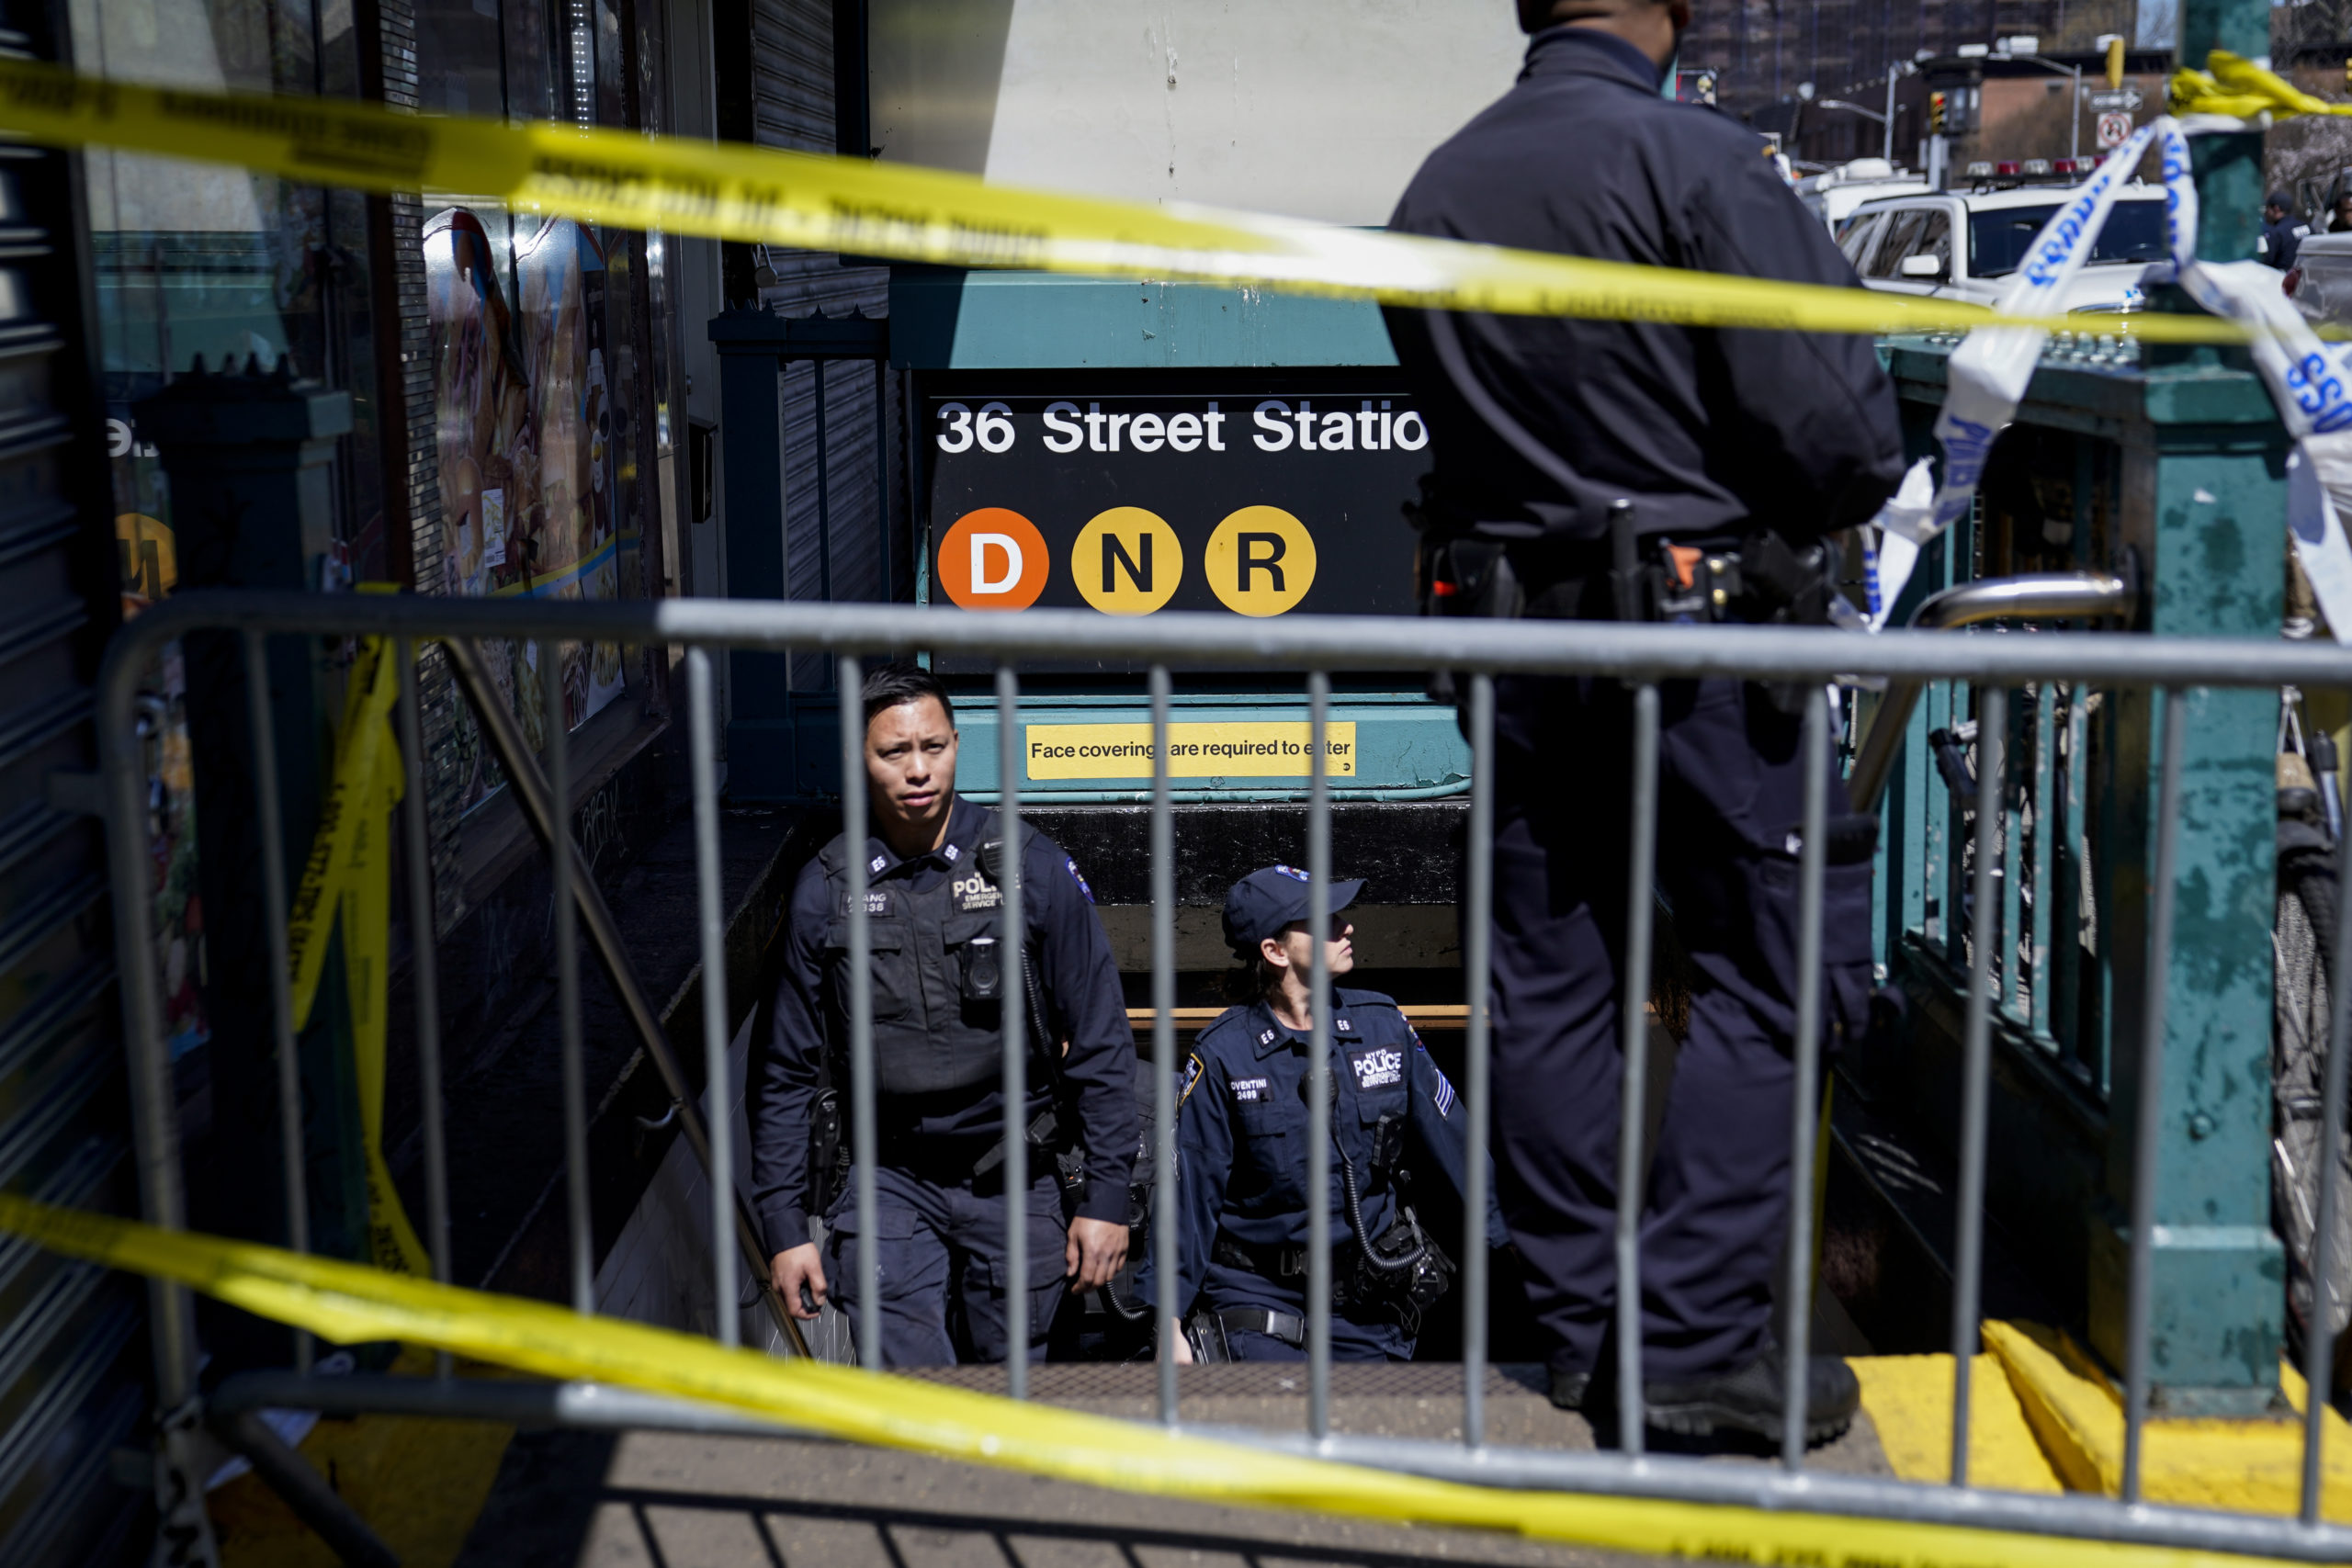 Security camera fail during NYC subway attack to be probed